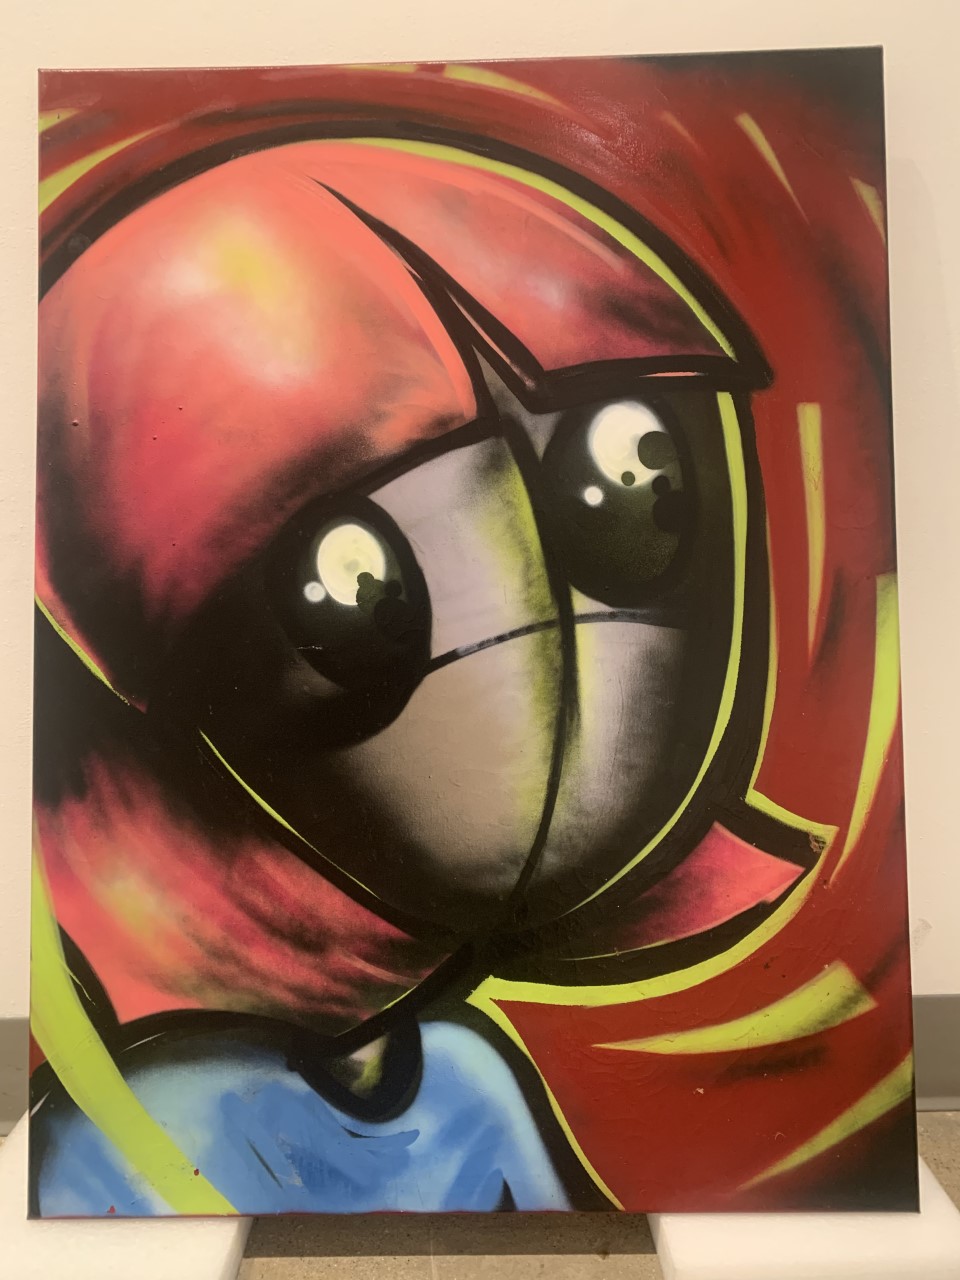 Lock Down Painting 3, image is the face of a girl with pink hair and large black eyes